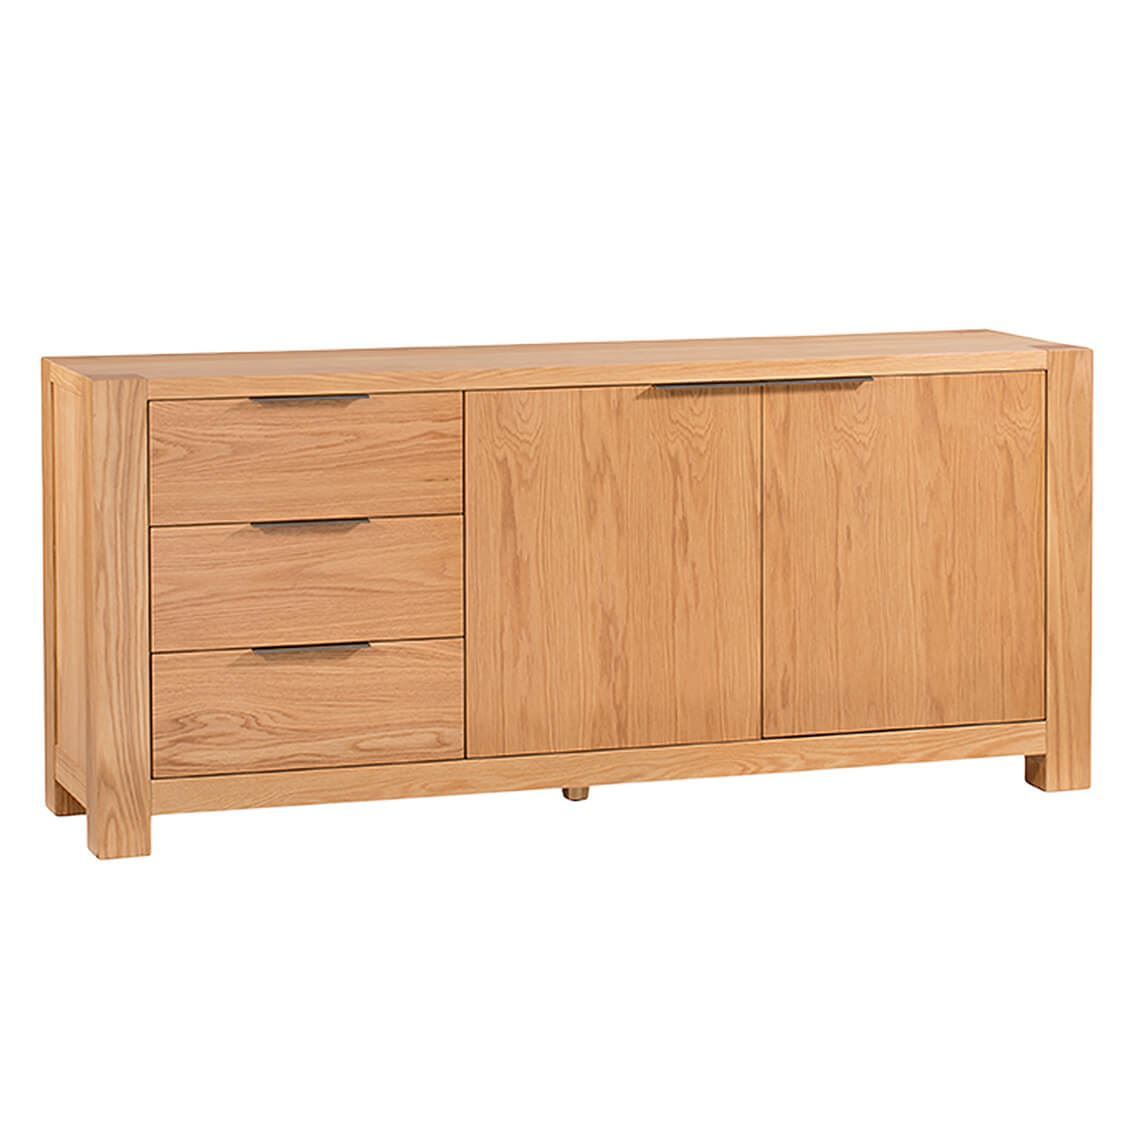 Titus 2 Door 3 Drawer Buffet, Natural Intended For Industrial Style 3 Drawer Buffets (View 26 of 30)